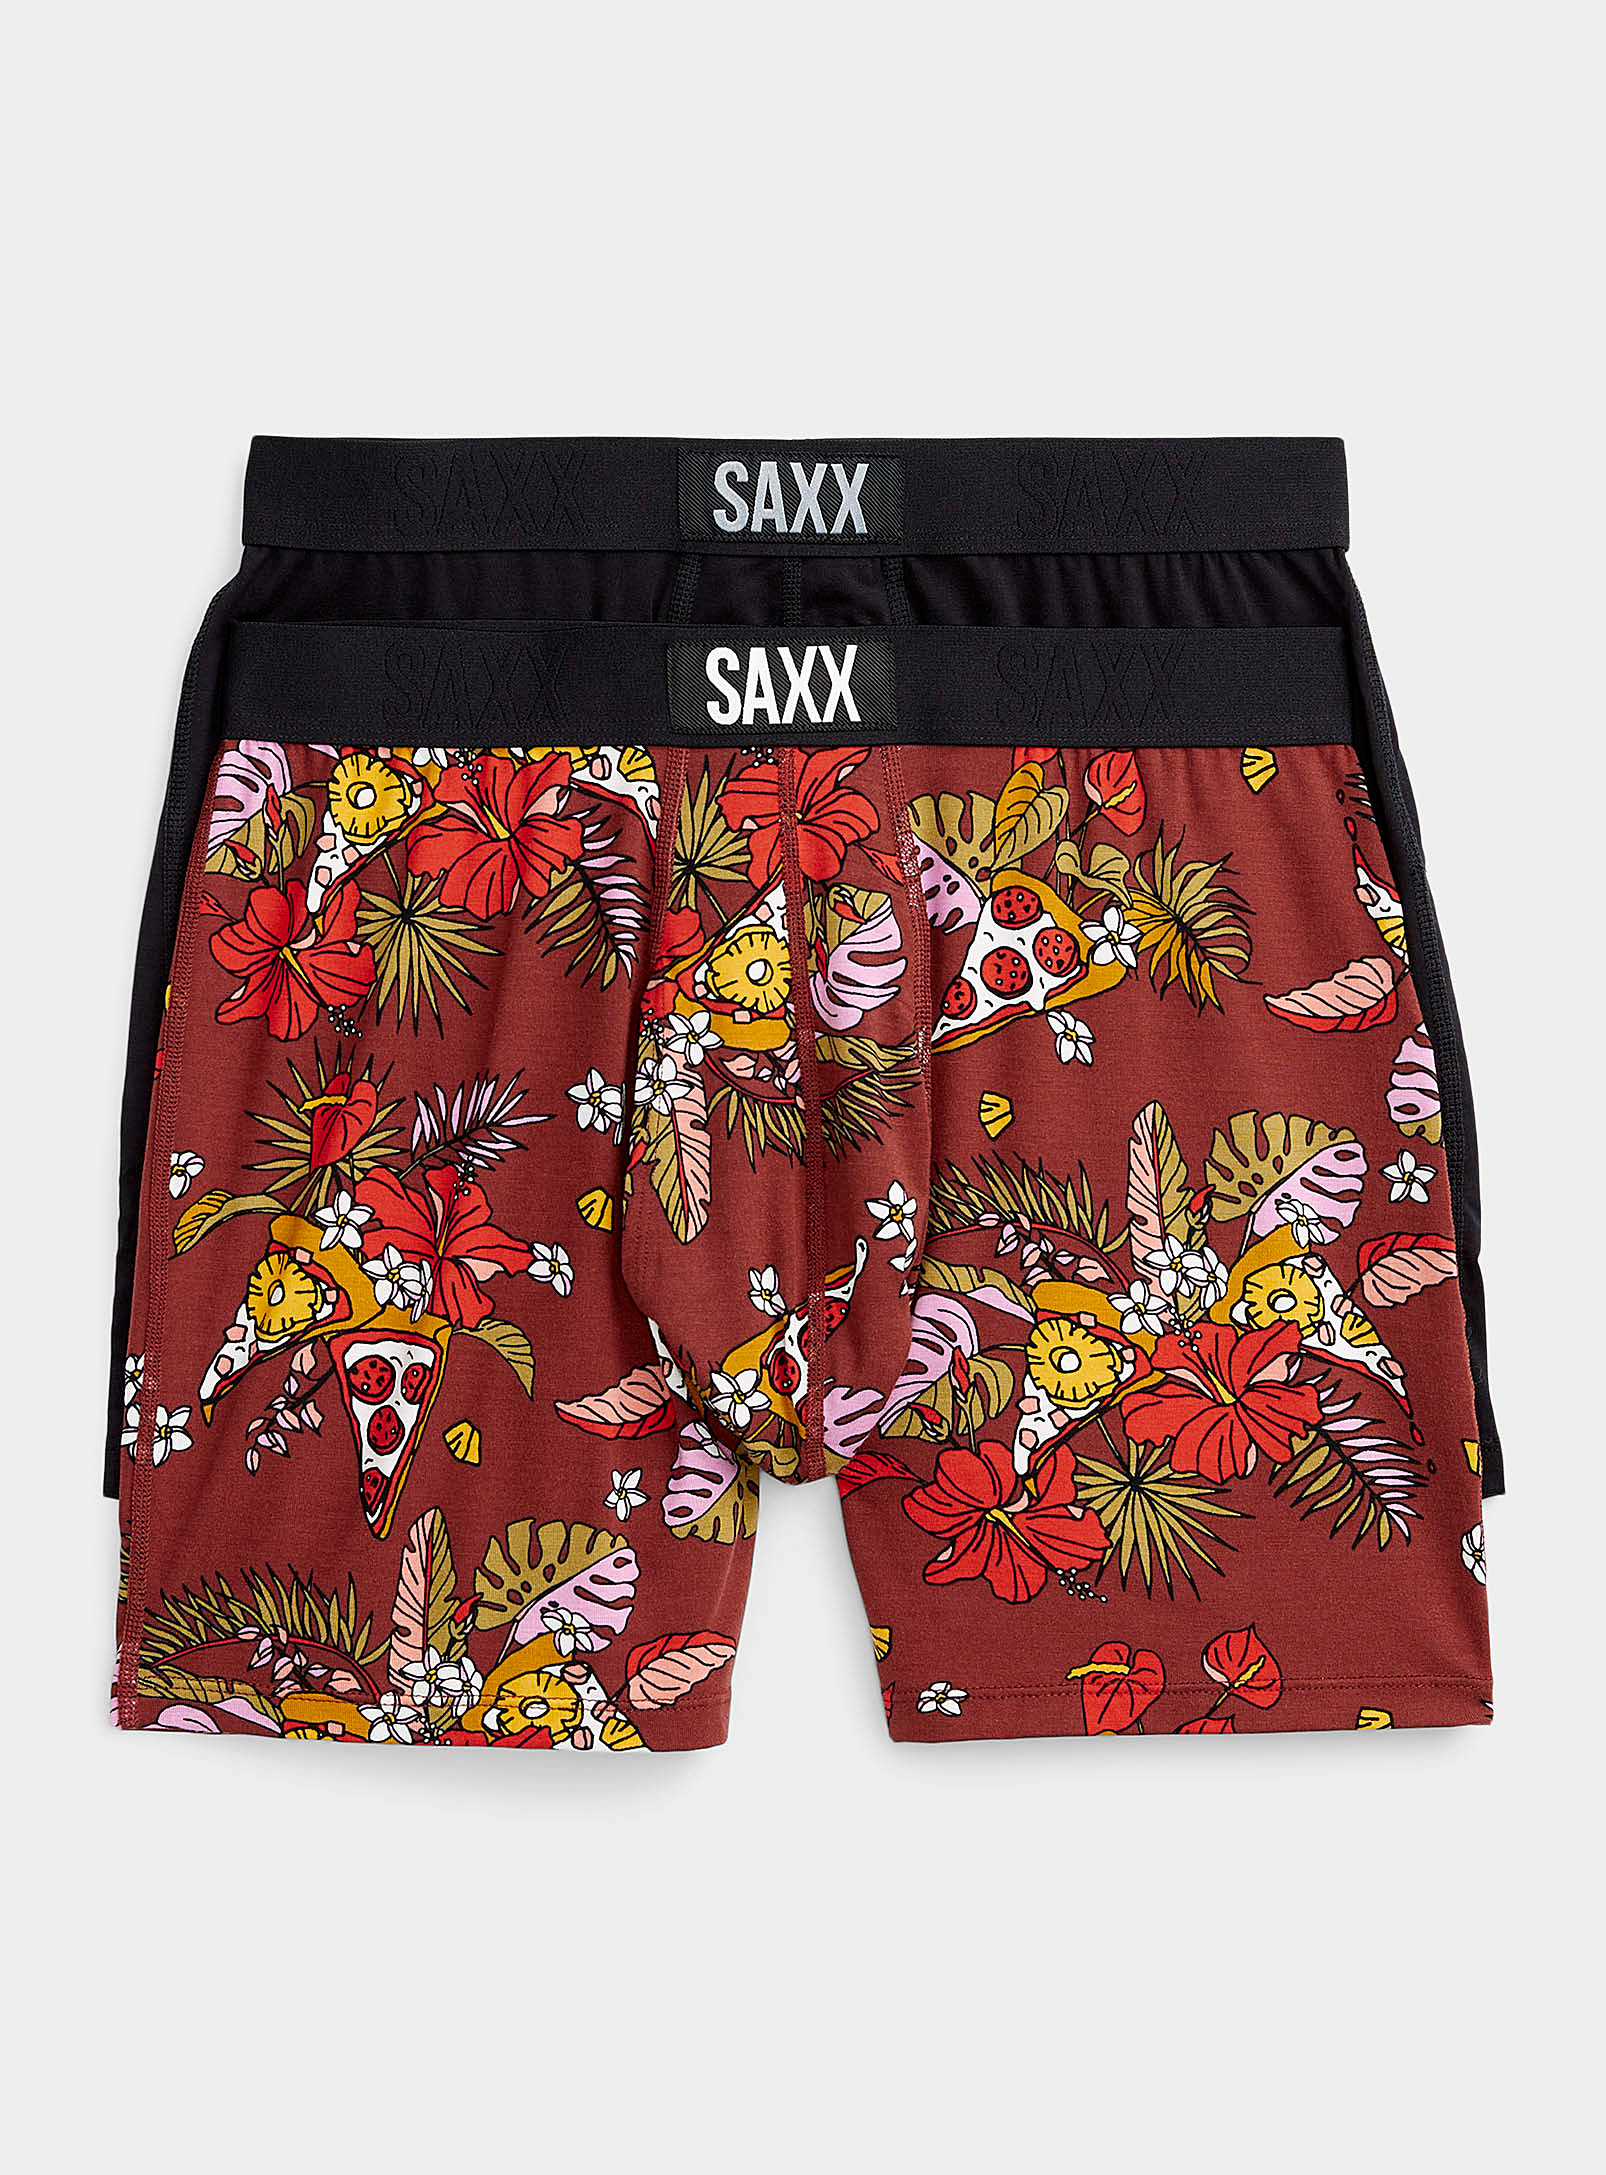 Saxx 2-pack In Patterned Red